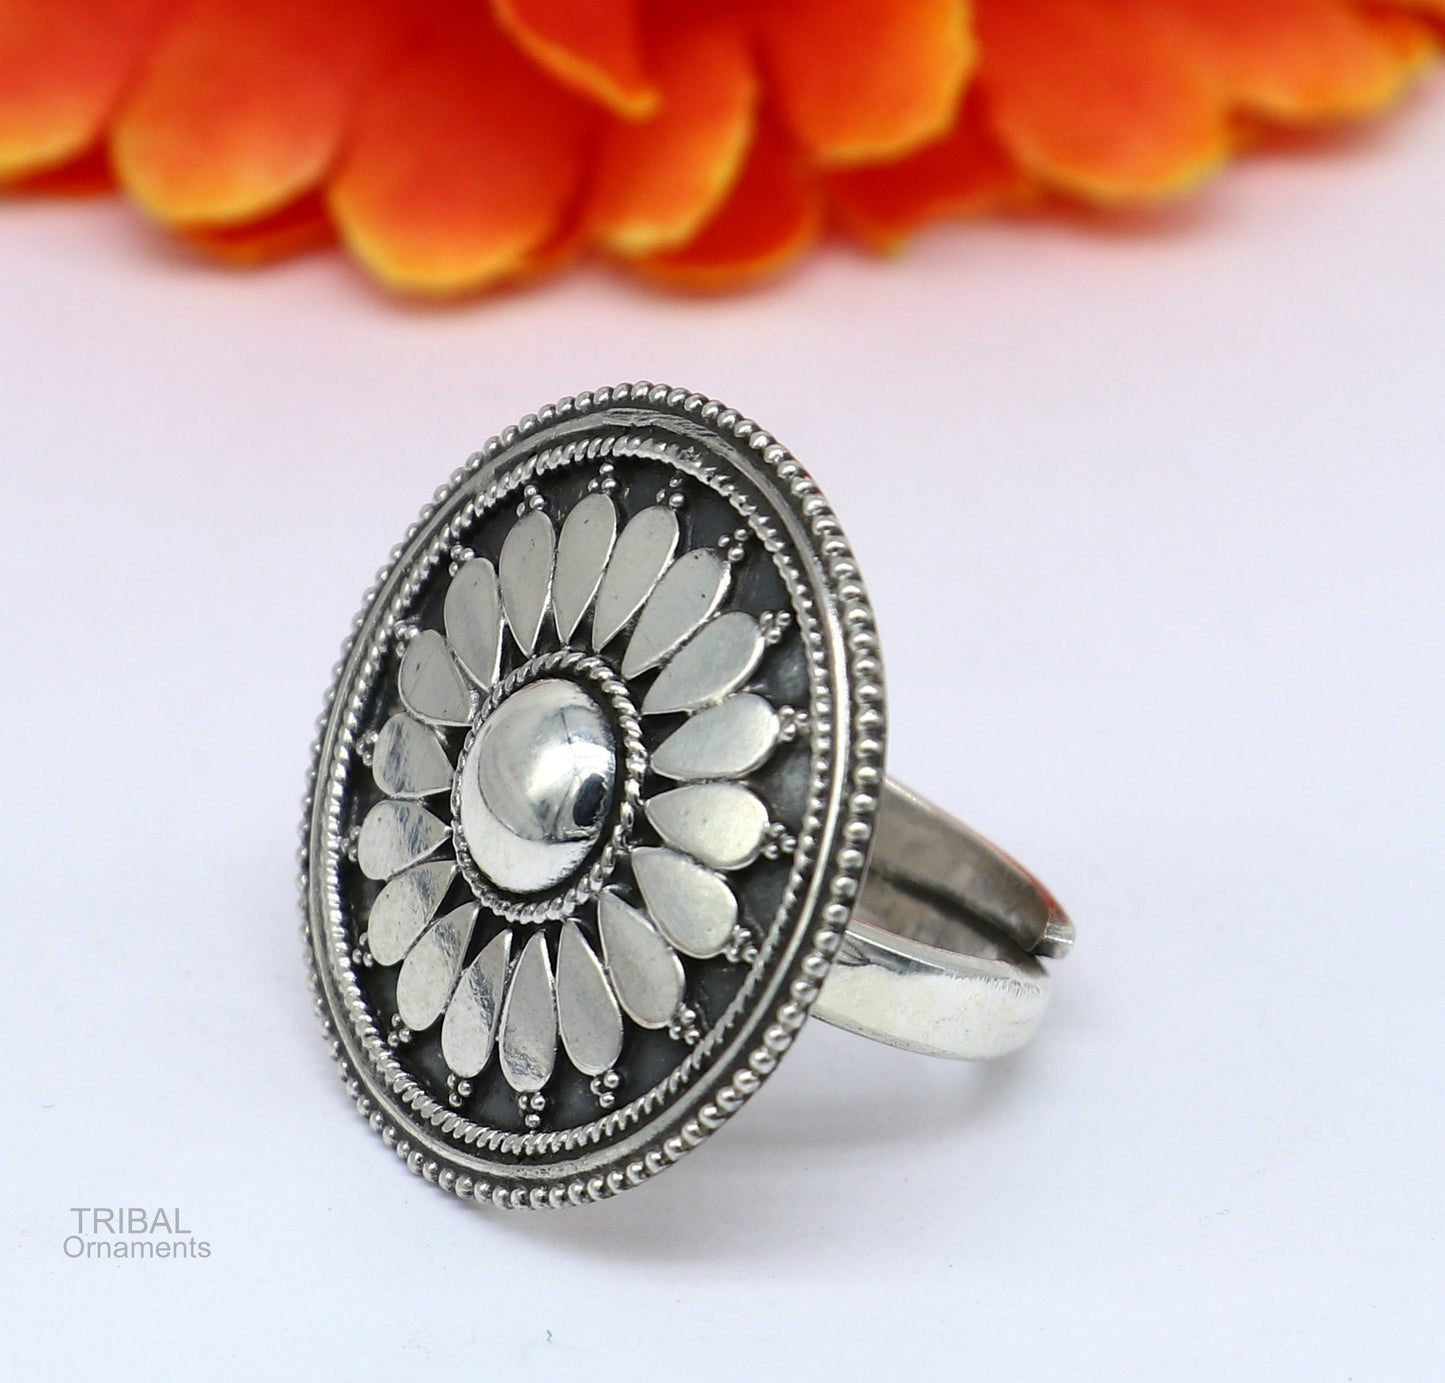 925 sterling silver handmade vintage antique style round rawa work charm ring band, best gifting brides wedding jewelry india sr310 - TRIBAL ORNAMENTS